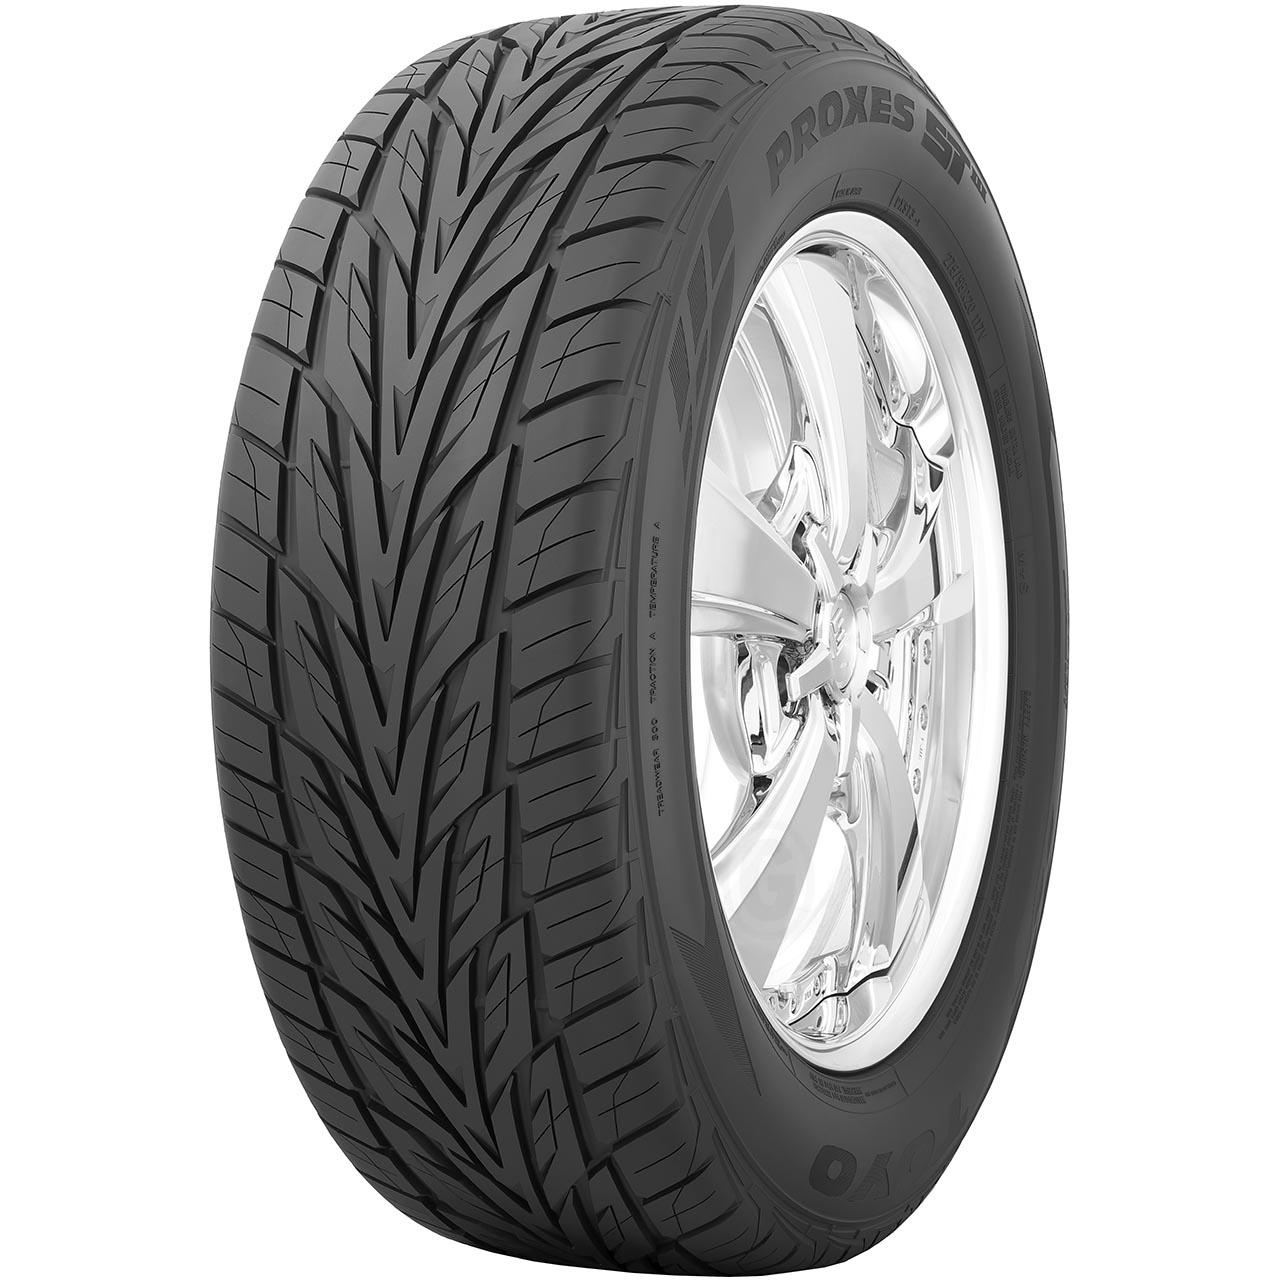 Toyo Proxes ST 3 275/60R17 110V